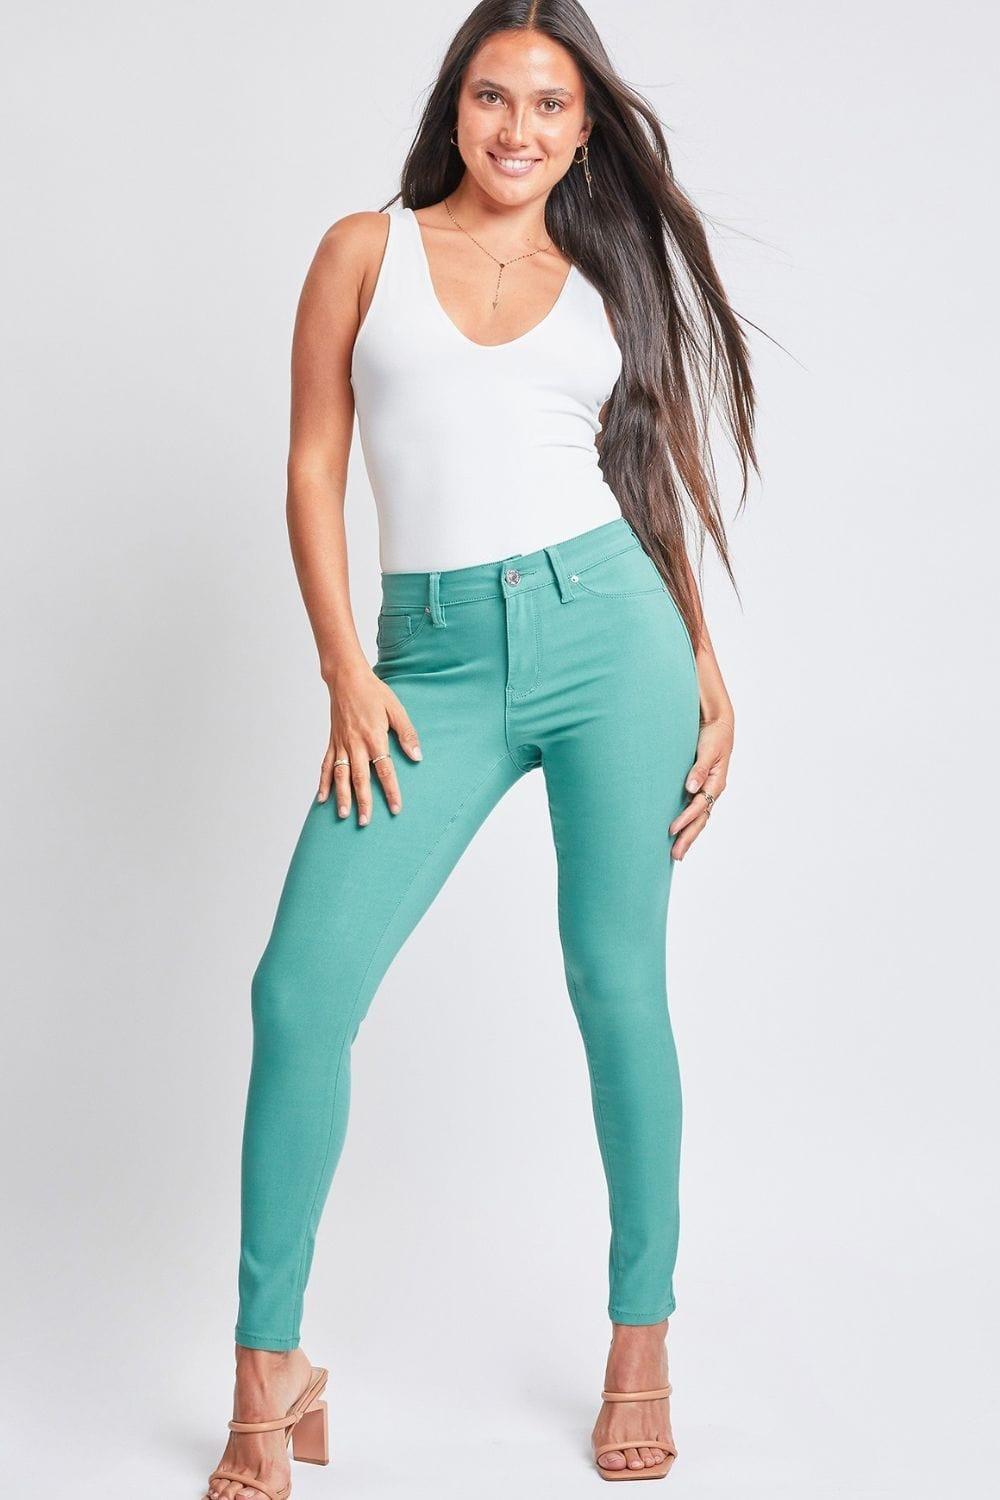 YMI Jeanswear Full Size Hyperstretch Mid-Rise Skinny Pants SeaGreen Jeans